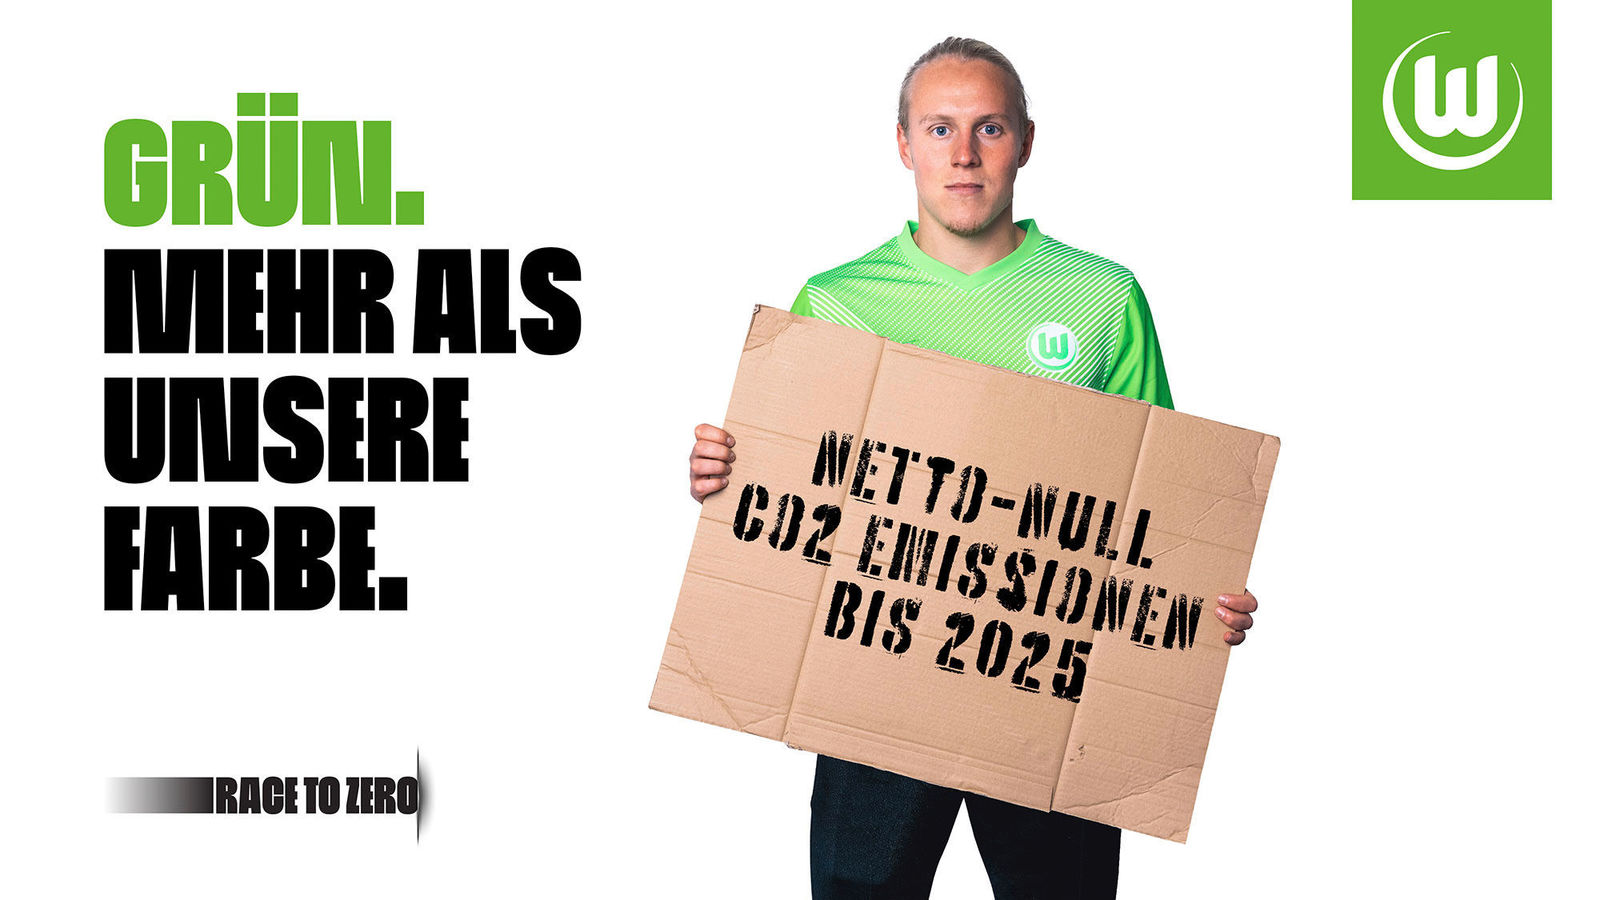 Story: VfL Wolfsburg leads the way in climate protection